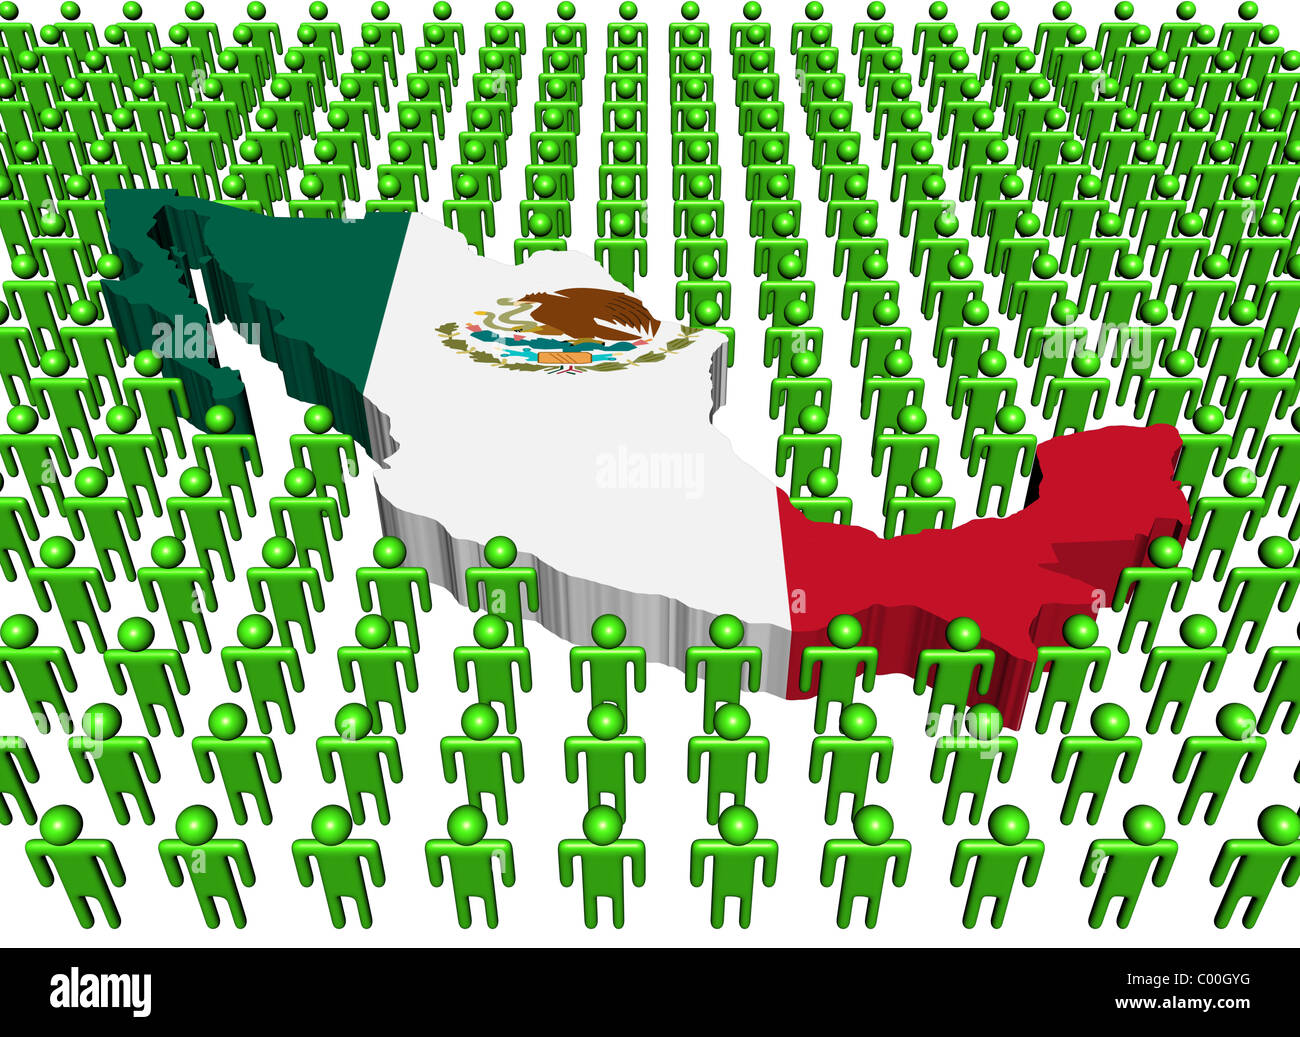 Mexico map flag surrounded by many abstract people illustration Stock Photo